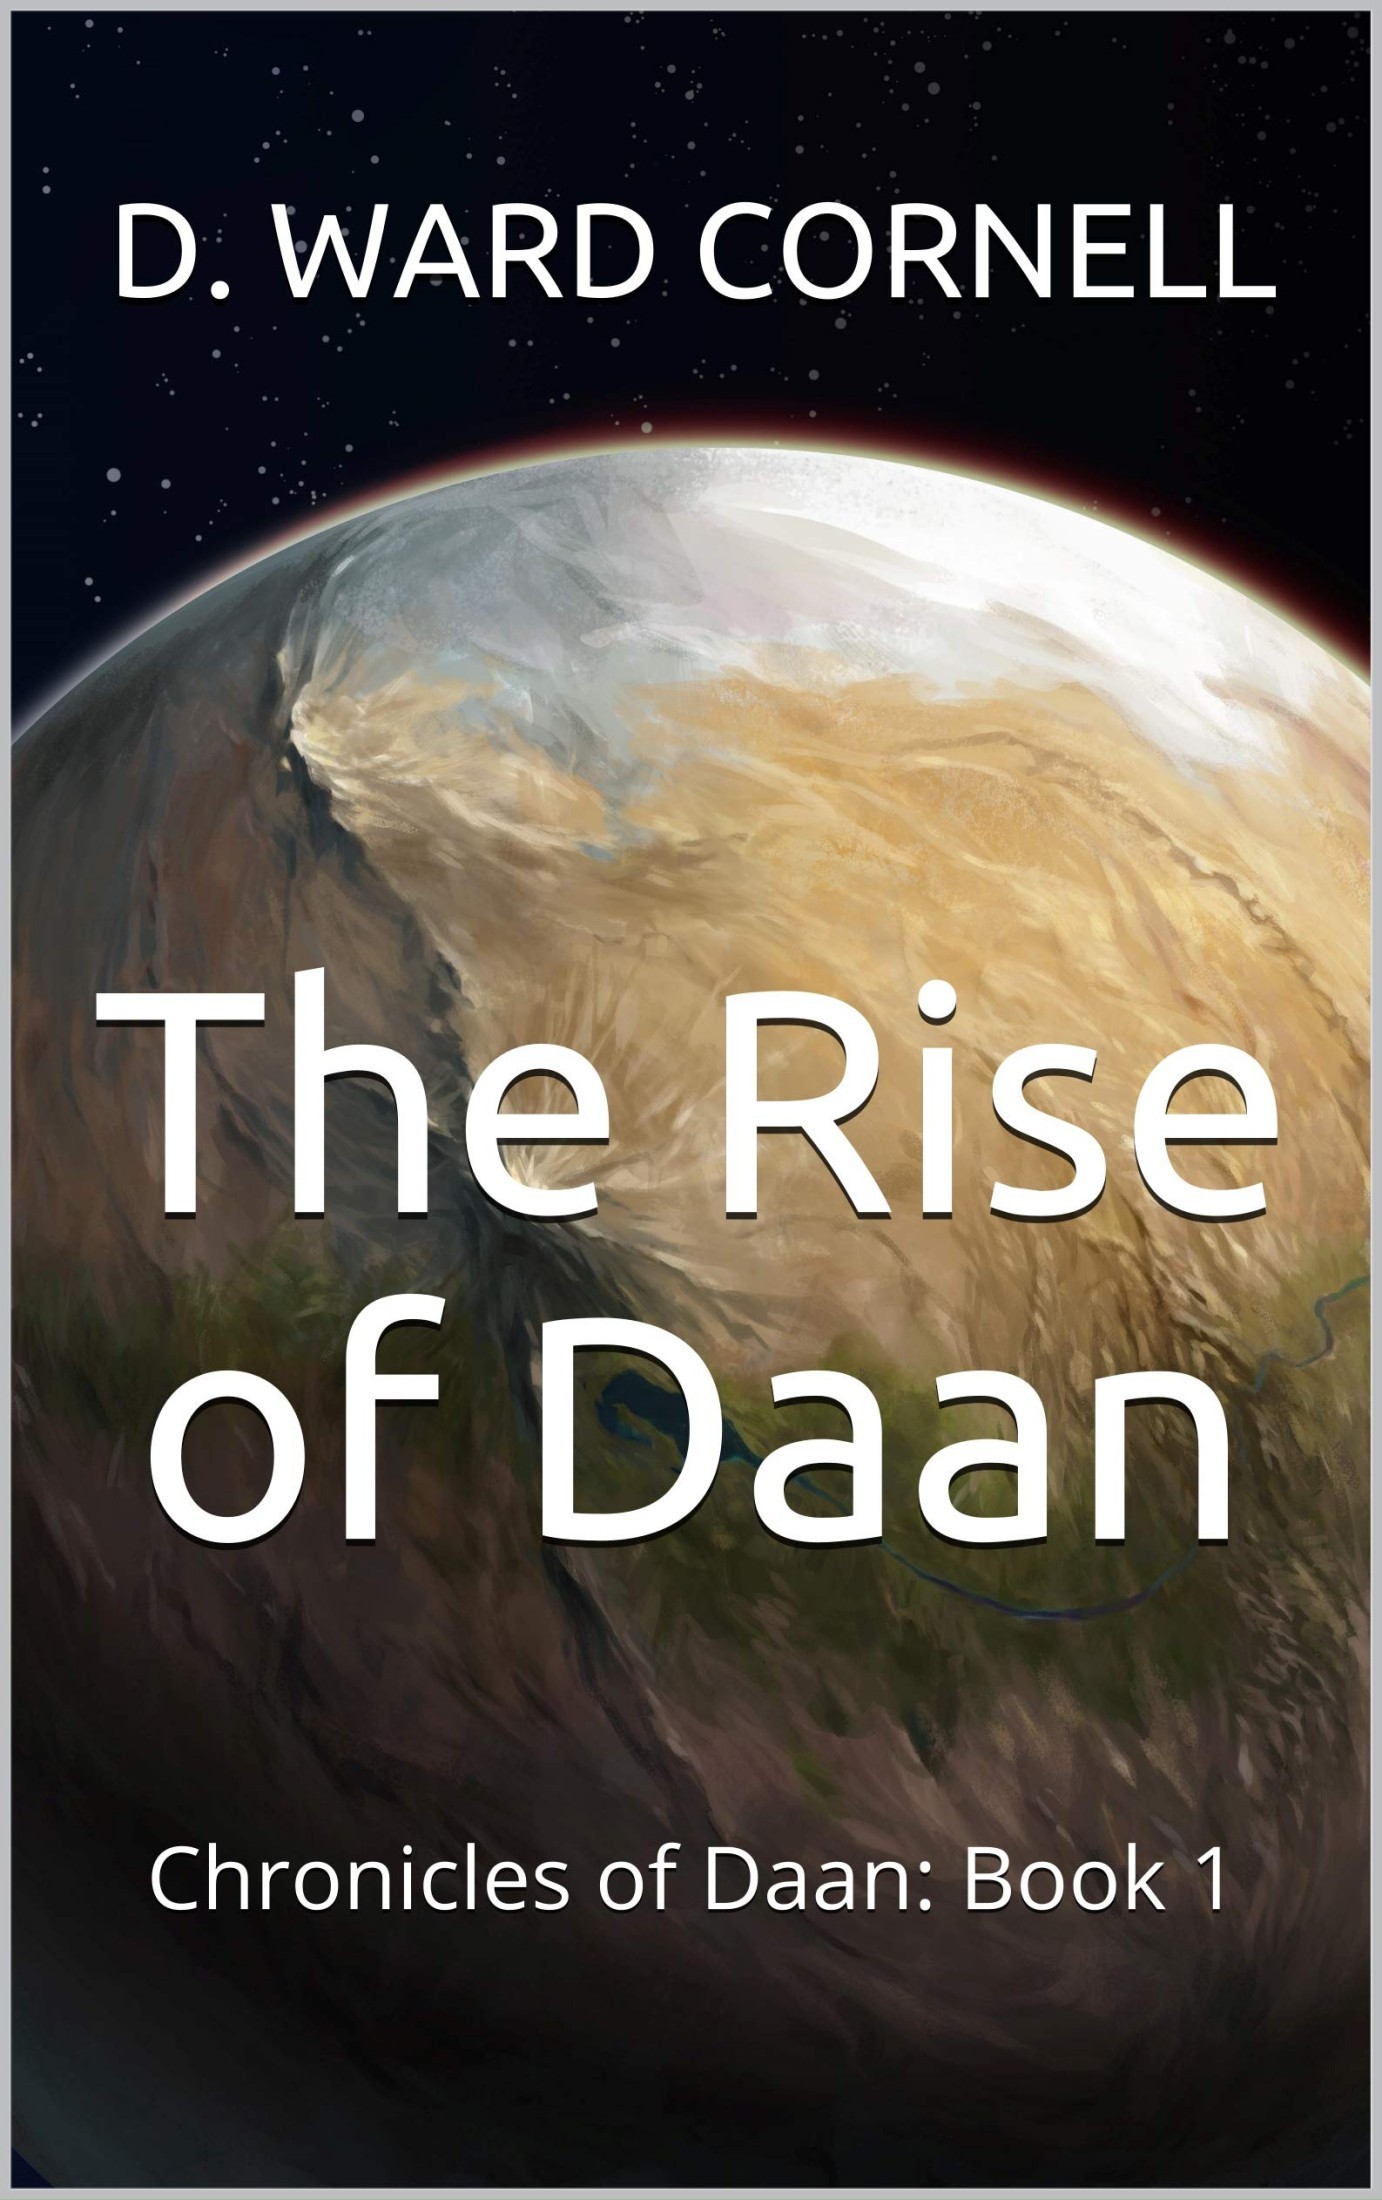 The Rise of Daan